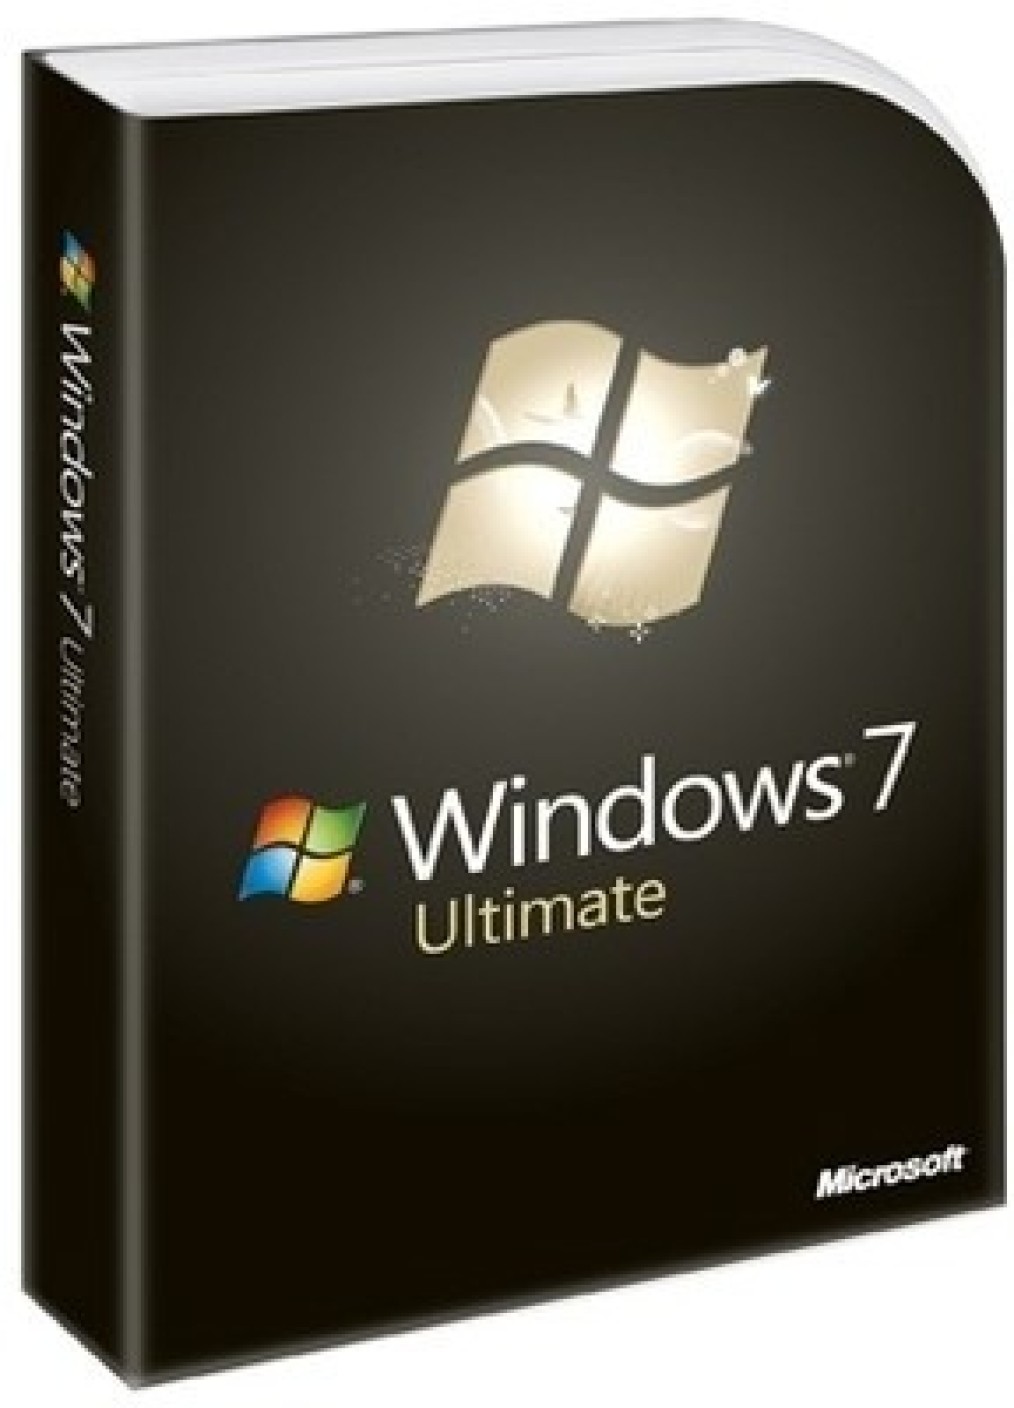 Windows 7 ultimate driver pack